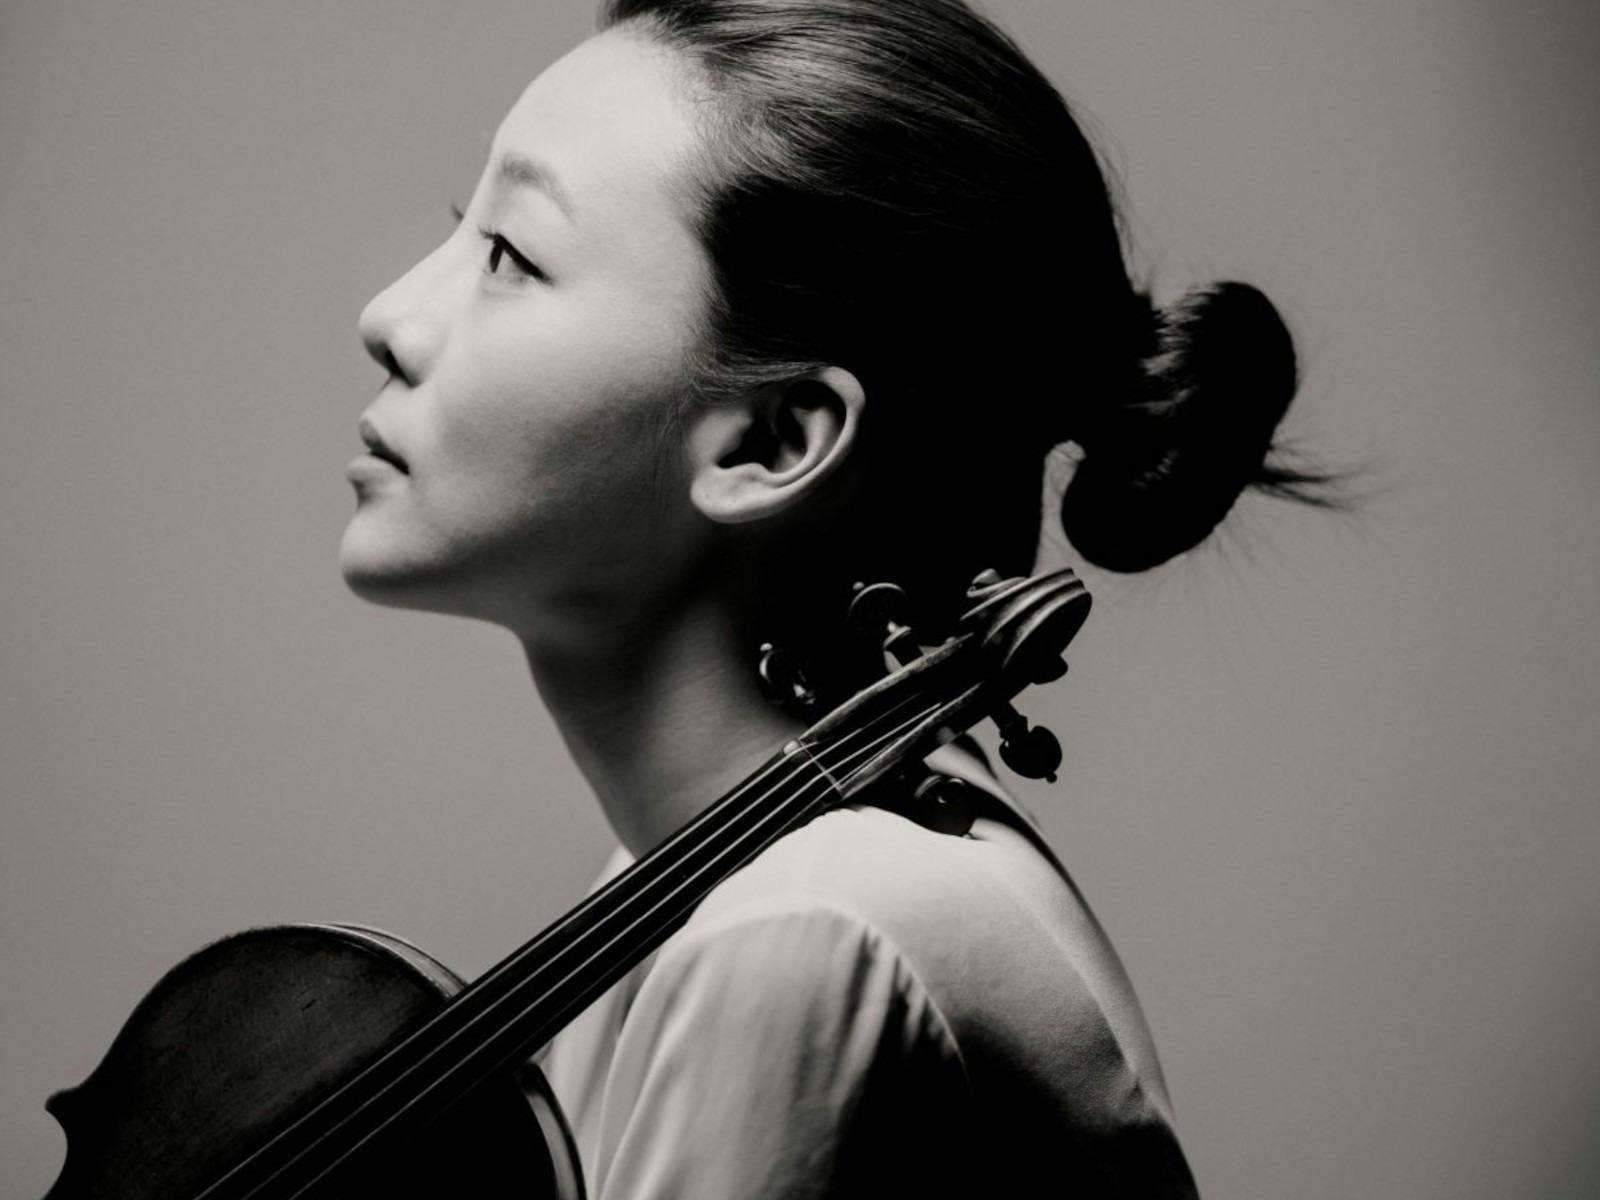 Monochrome photograph of a woman, against a grey backdrop, with a violin leaning on her shoulder.